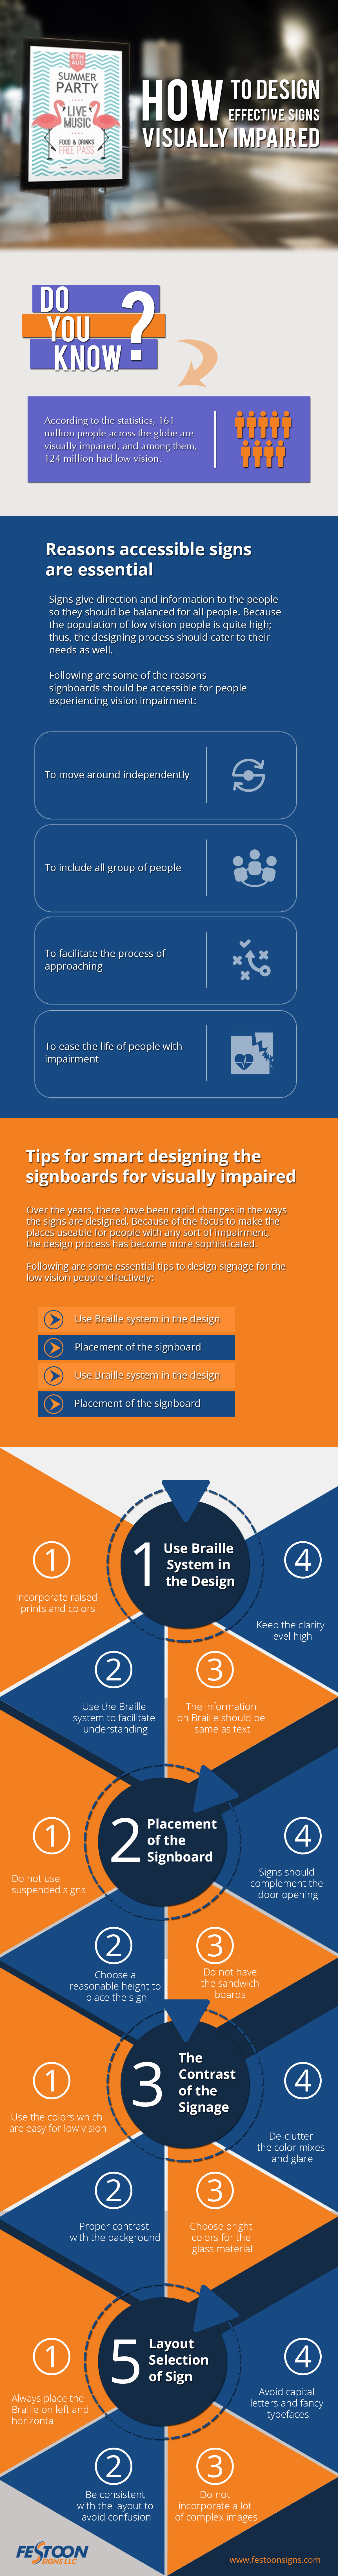 How to design effective signs for visually impaired